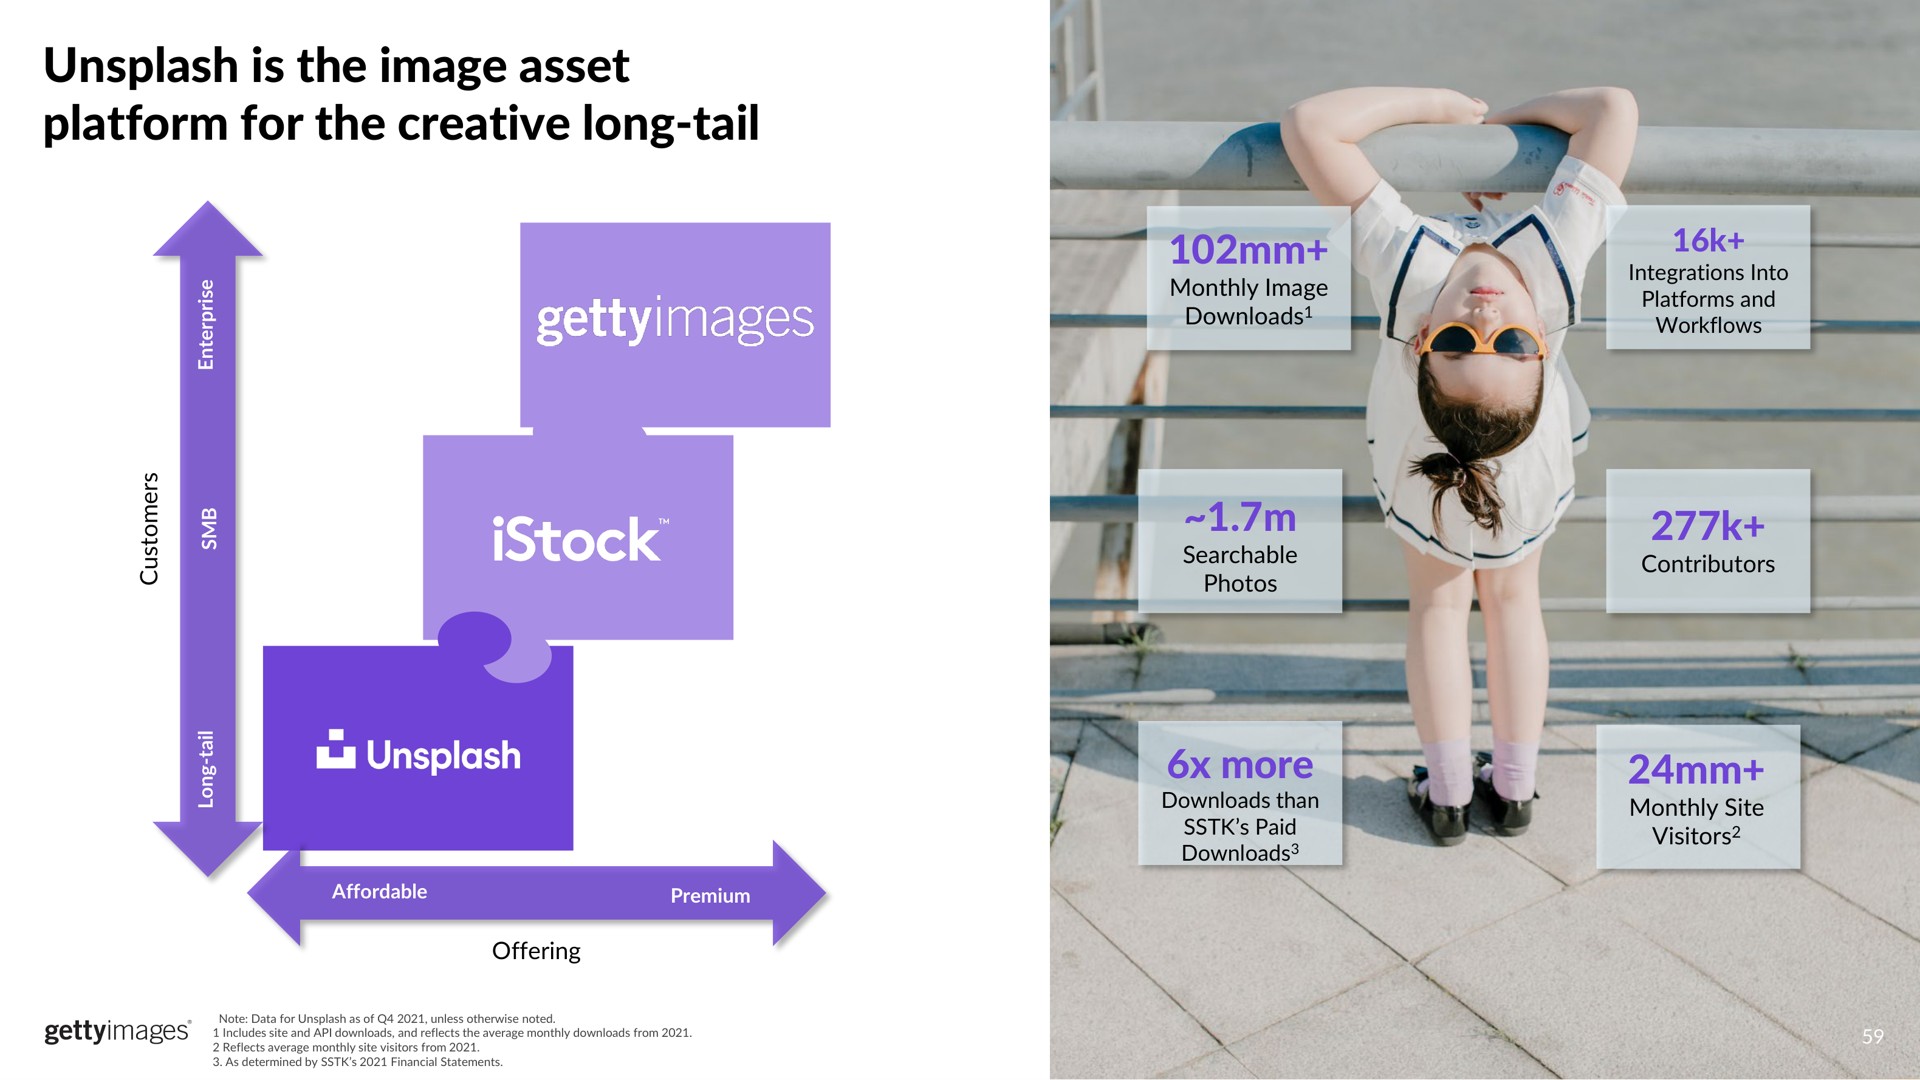 is the image asset platform for the creative long tail more | Getty